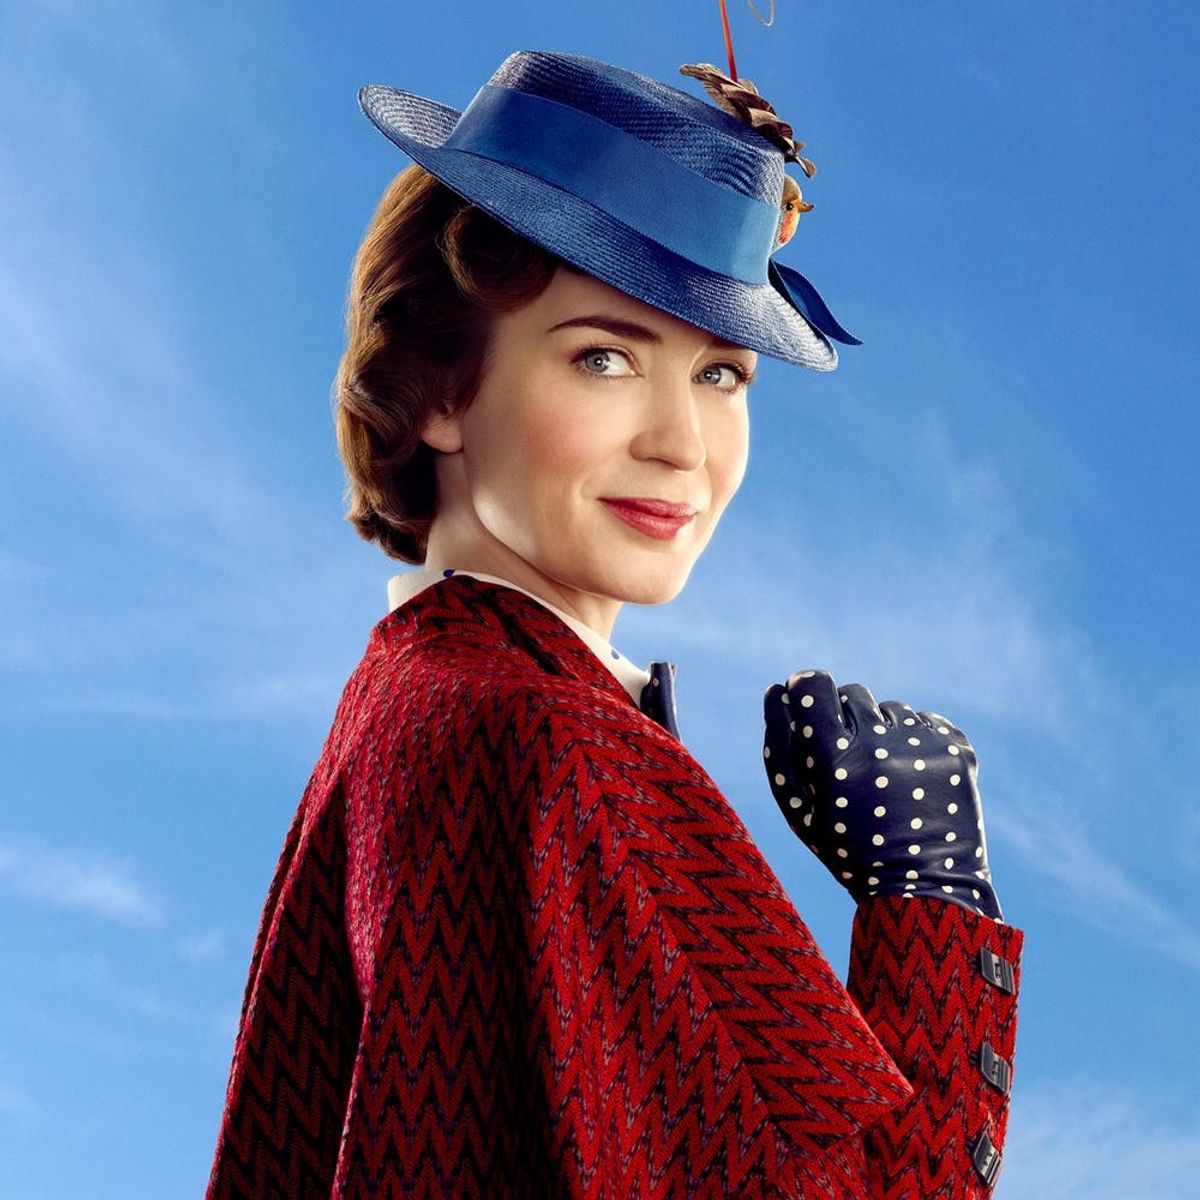 The Full ‘Mary Poppins Returns’ Trailer Is Here — and It’s Downright Magical